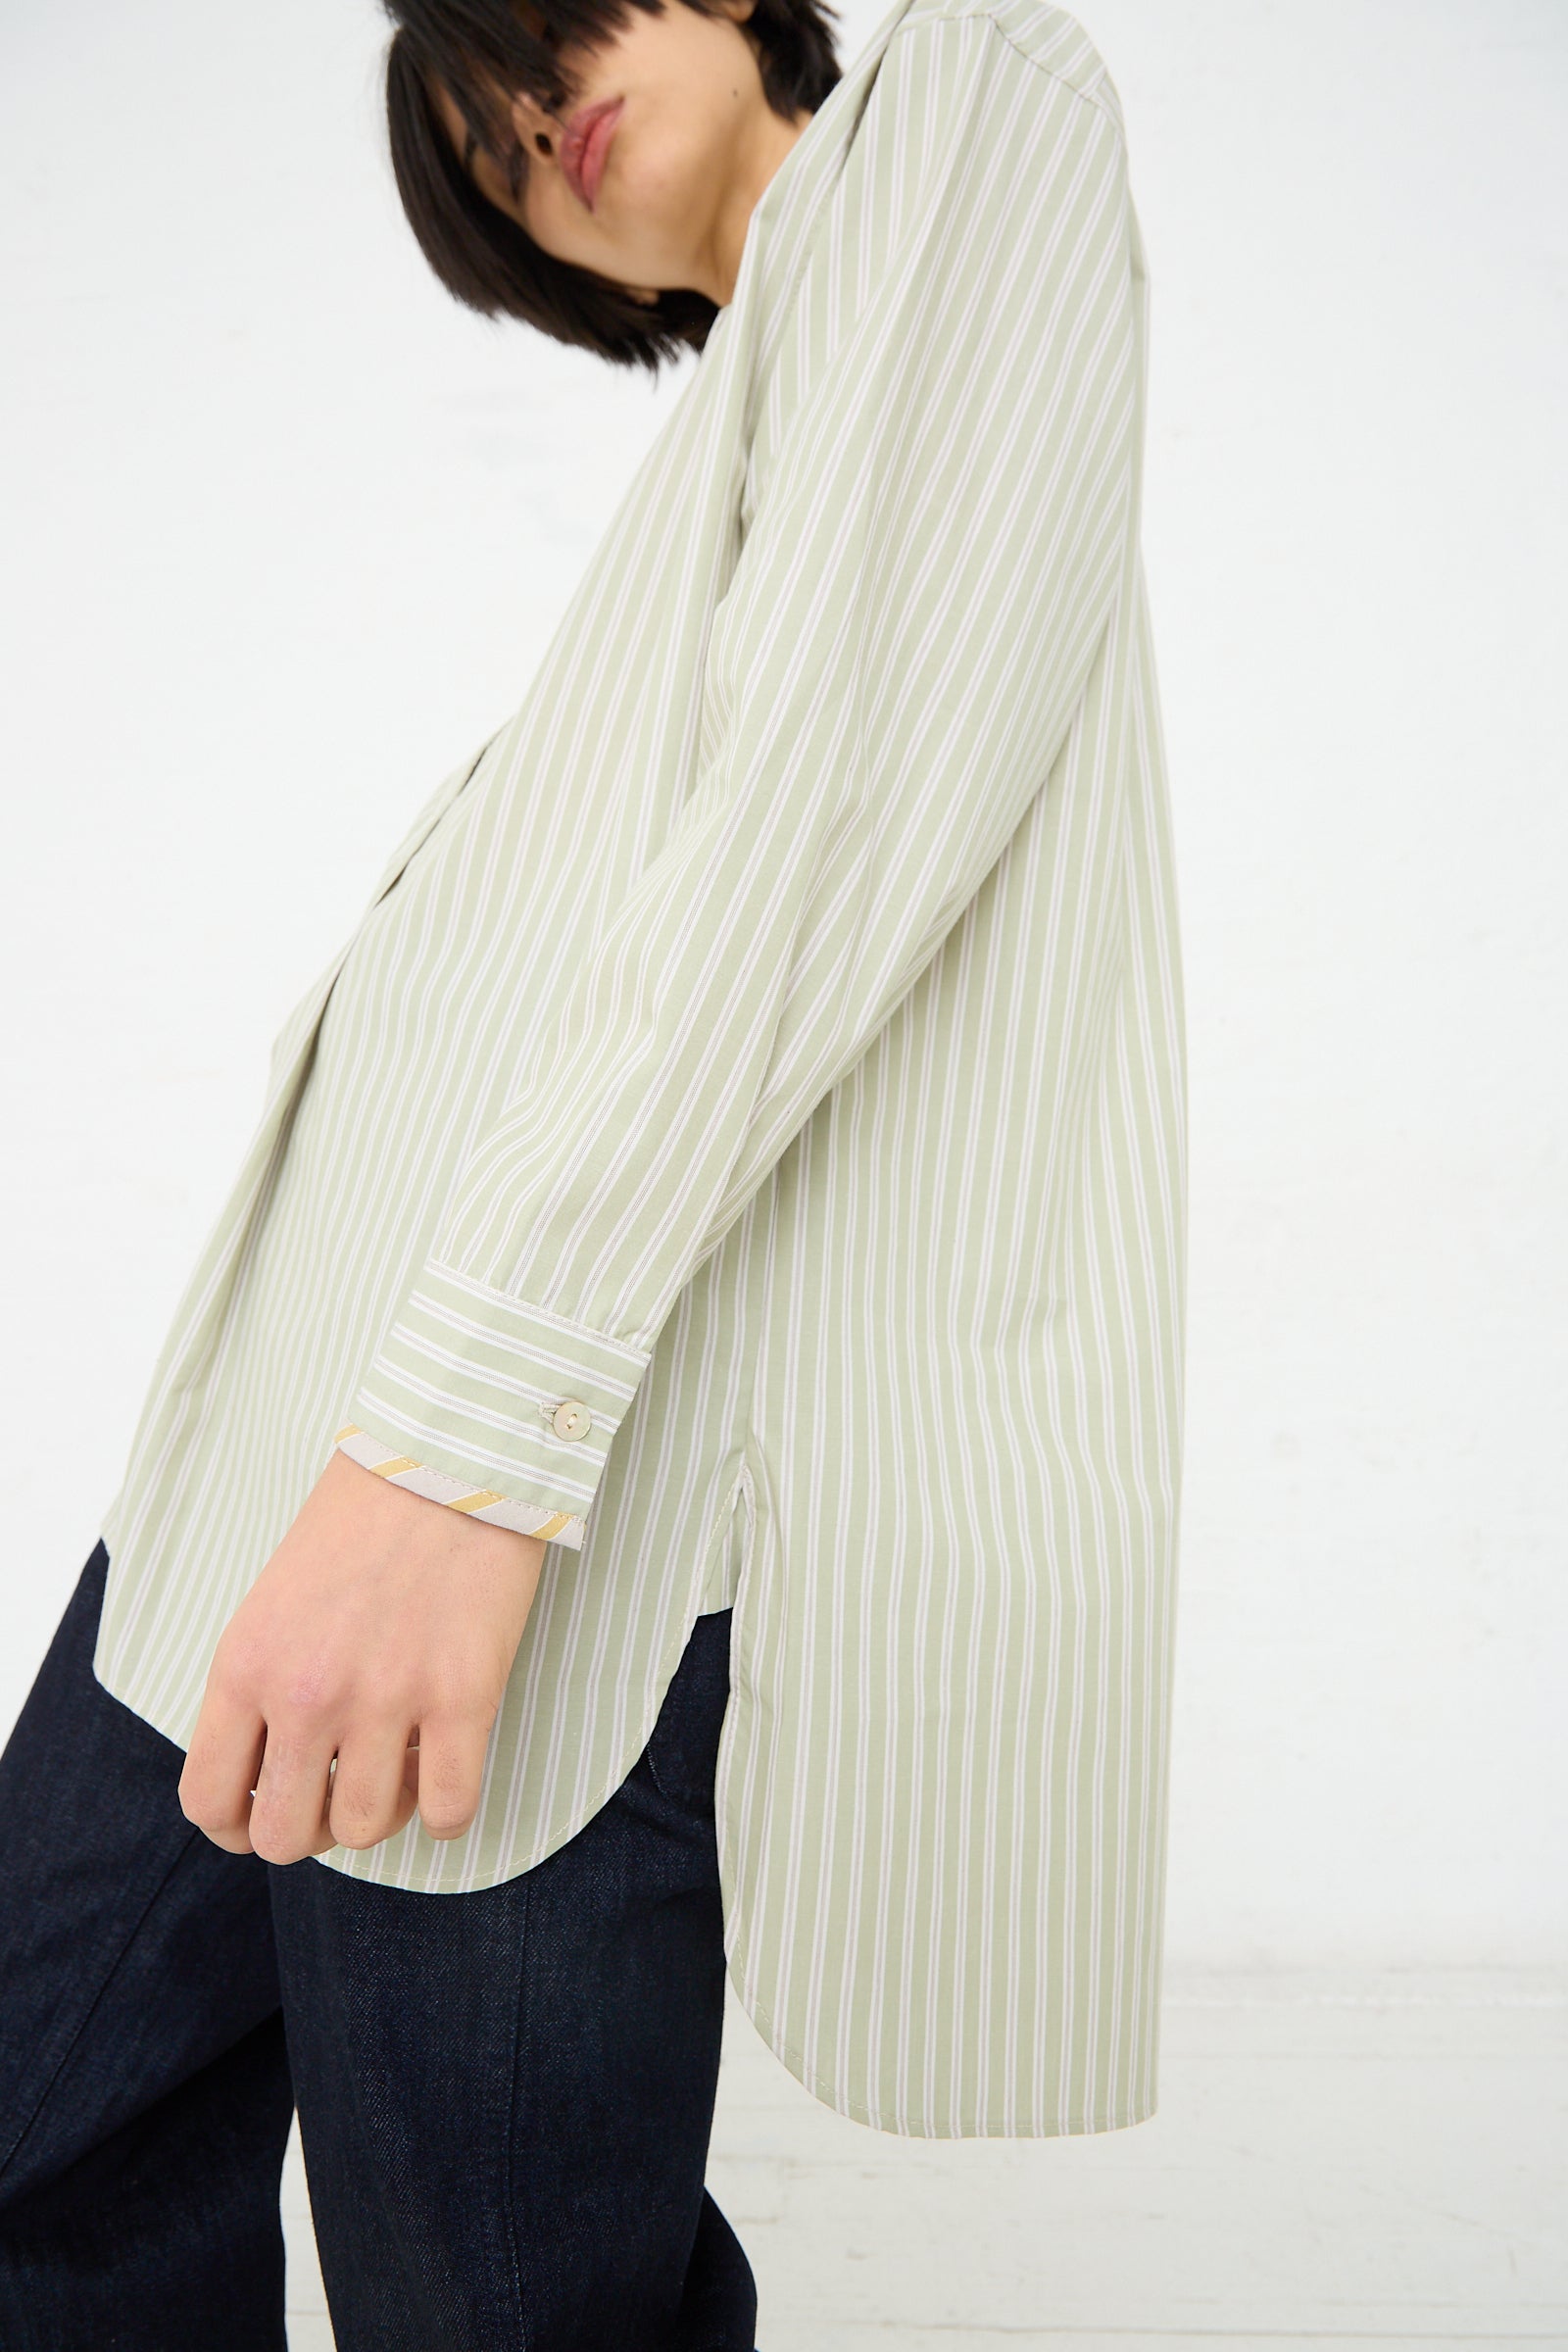 A person in a Japanese Cotton Ines Shirt in Mint and Ecru by Cawley, reflecting British manufacturing, and blue jeans with their head tilted downward, obscuring their face from view.